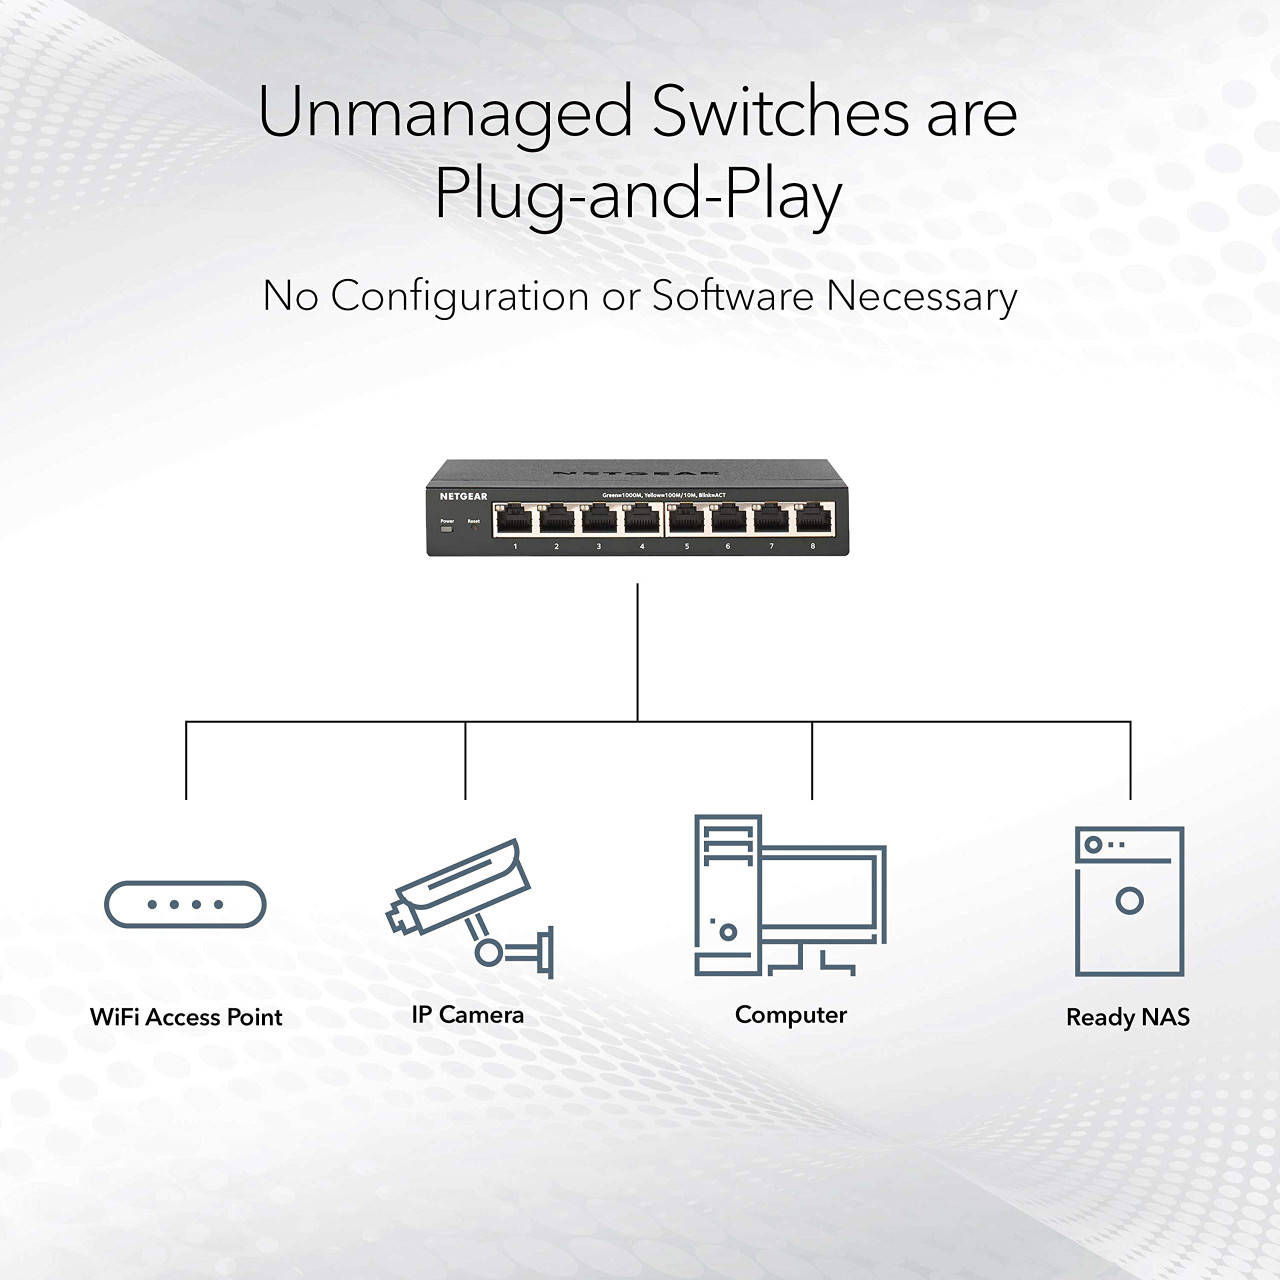 NETGEAR 16-Port Gigabit Ethernet Unmanaged PoE Switch (GS116PP) - with 16 x PoE+ @ 183W, Desktop, Wall Mount or Rackmount, and Limited Lifetime Protection